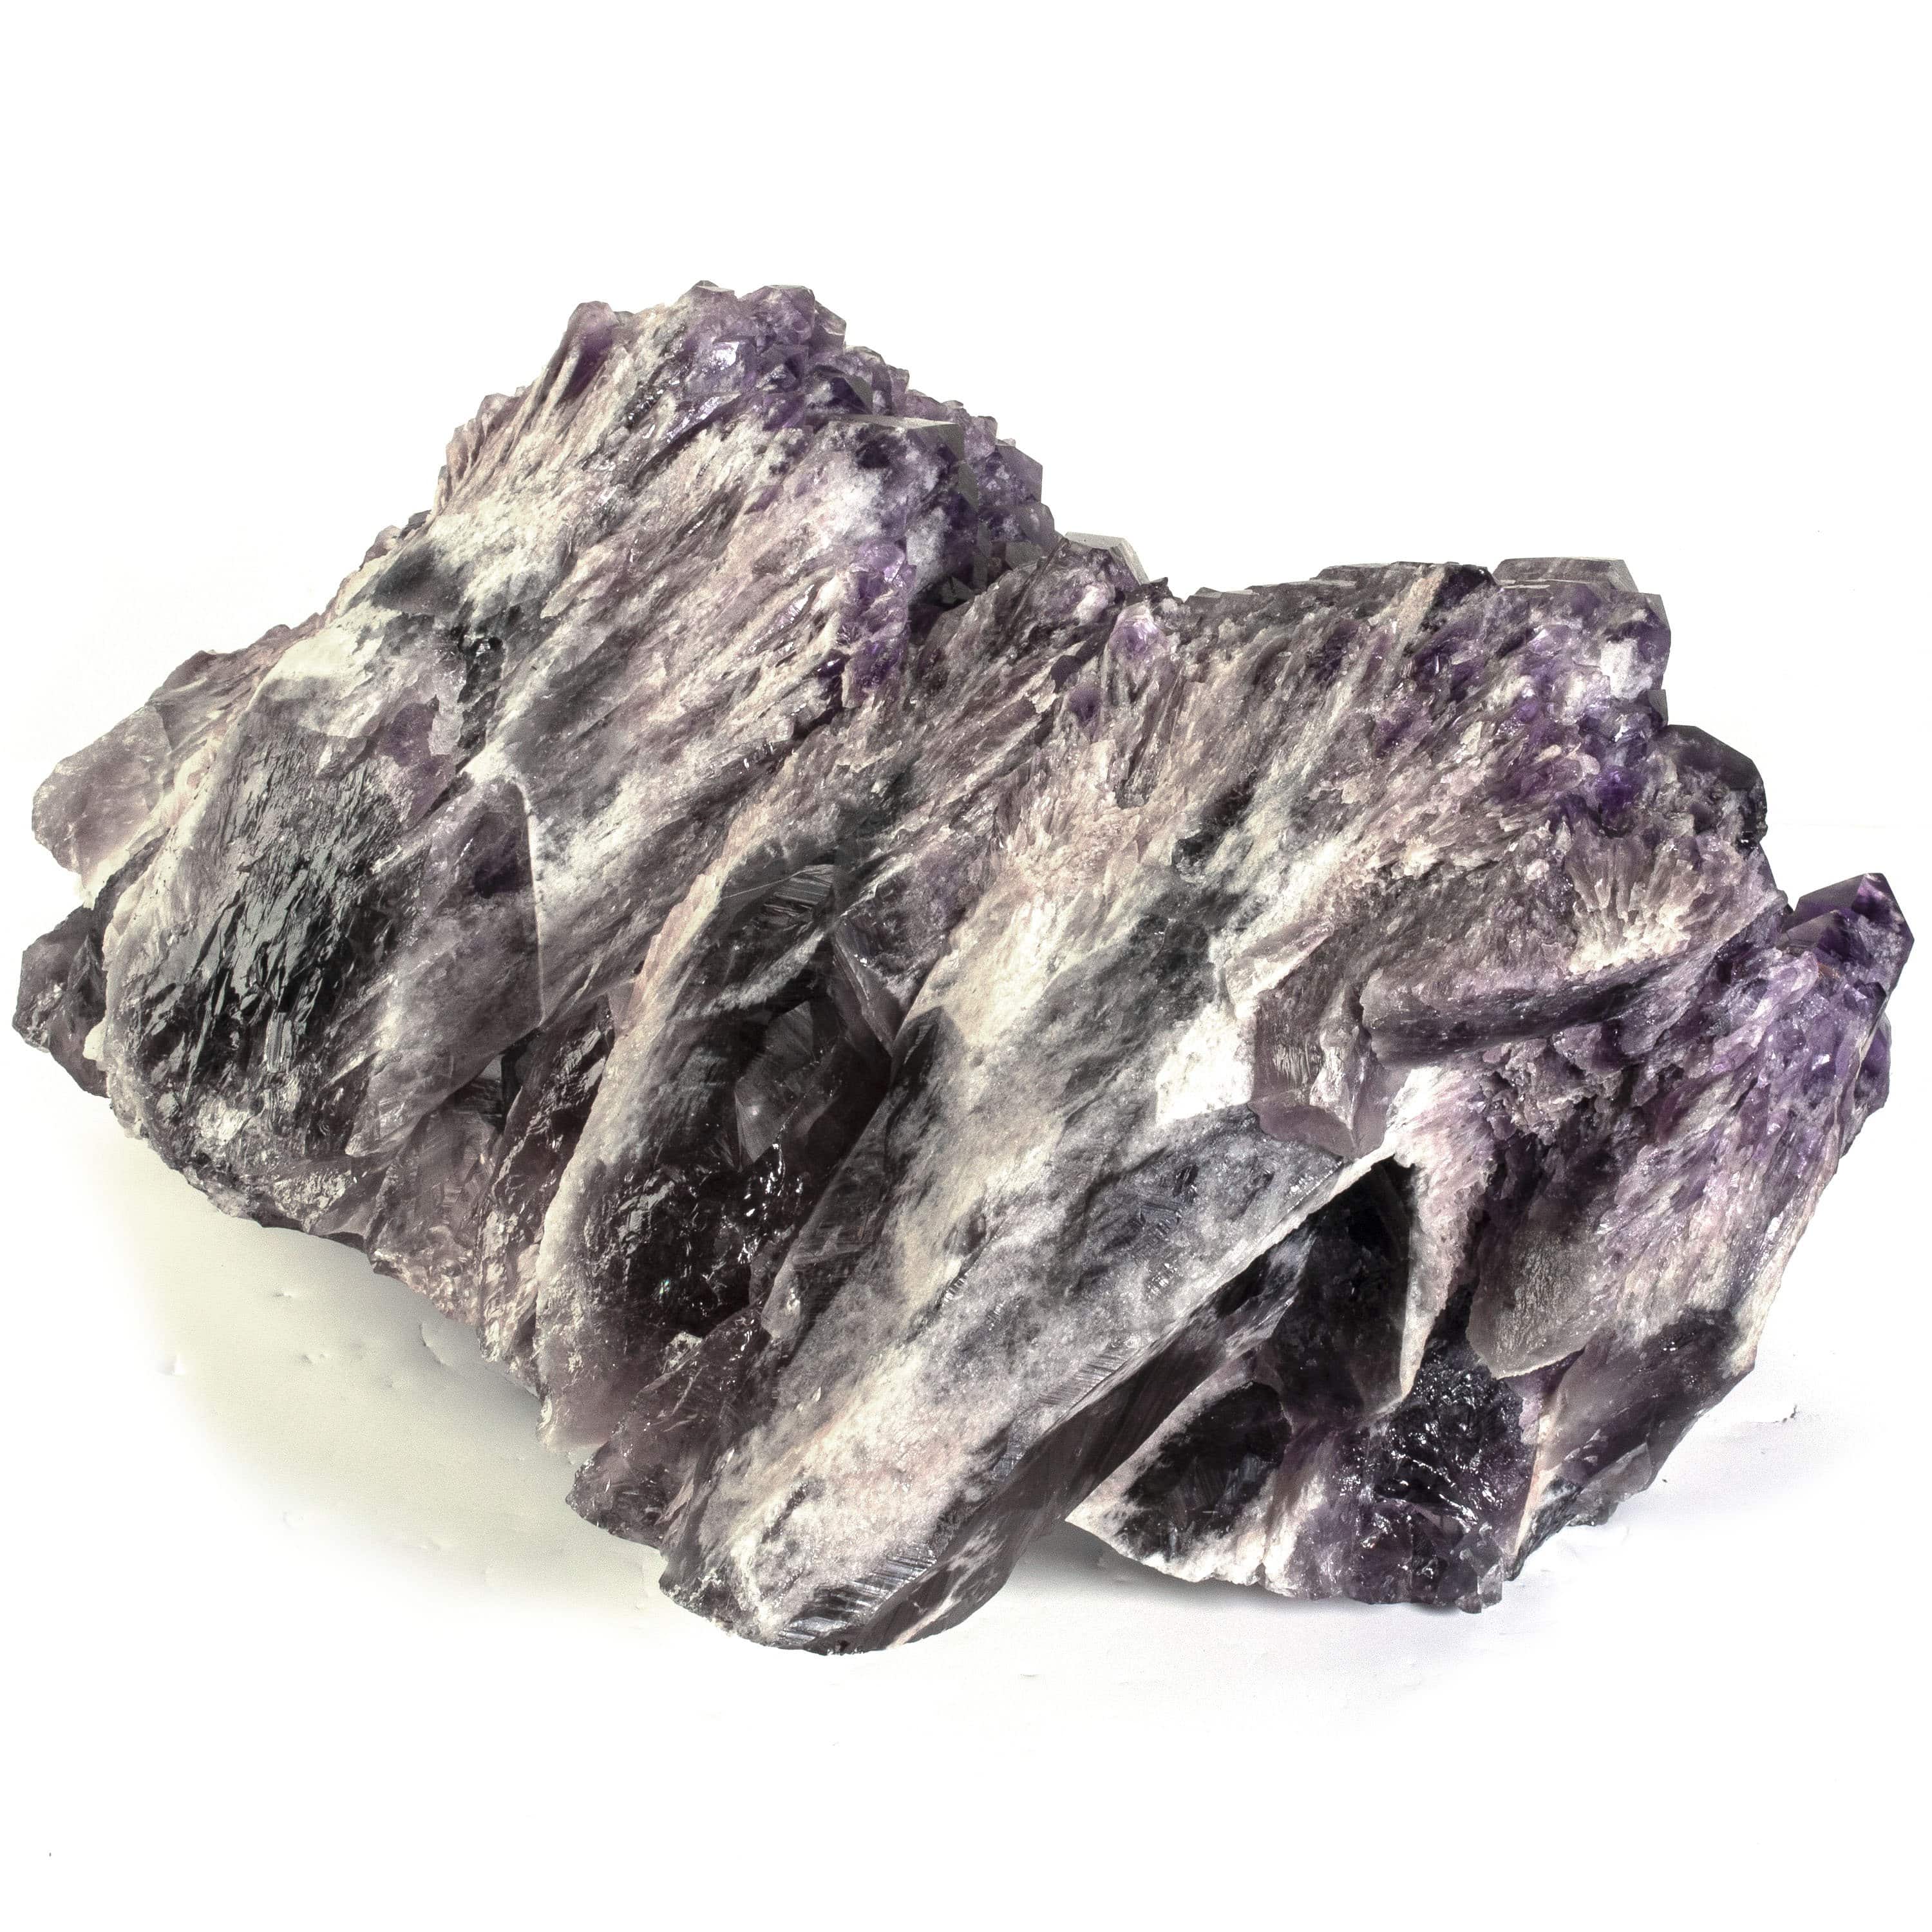 Kalifano Amethyst Rare Natural Elestial Amethyst Cluster Point from Brazil - 54.2 lbs ALW8900.001